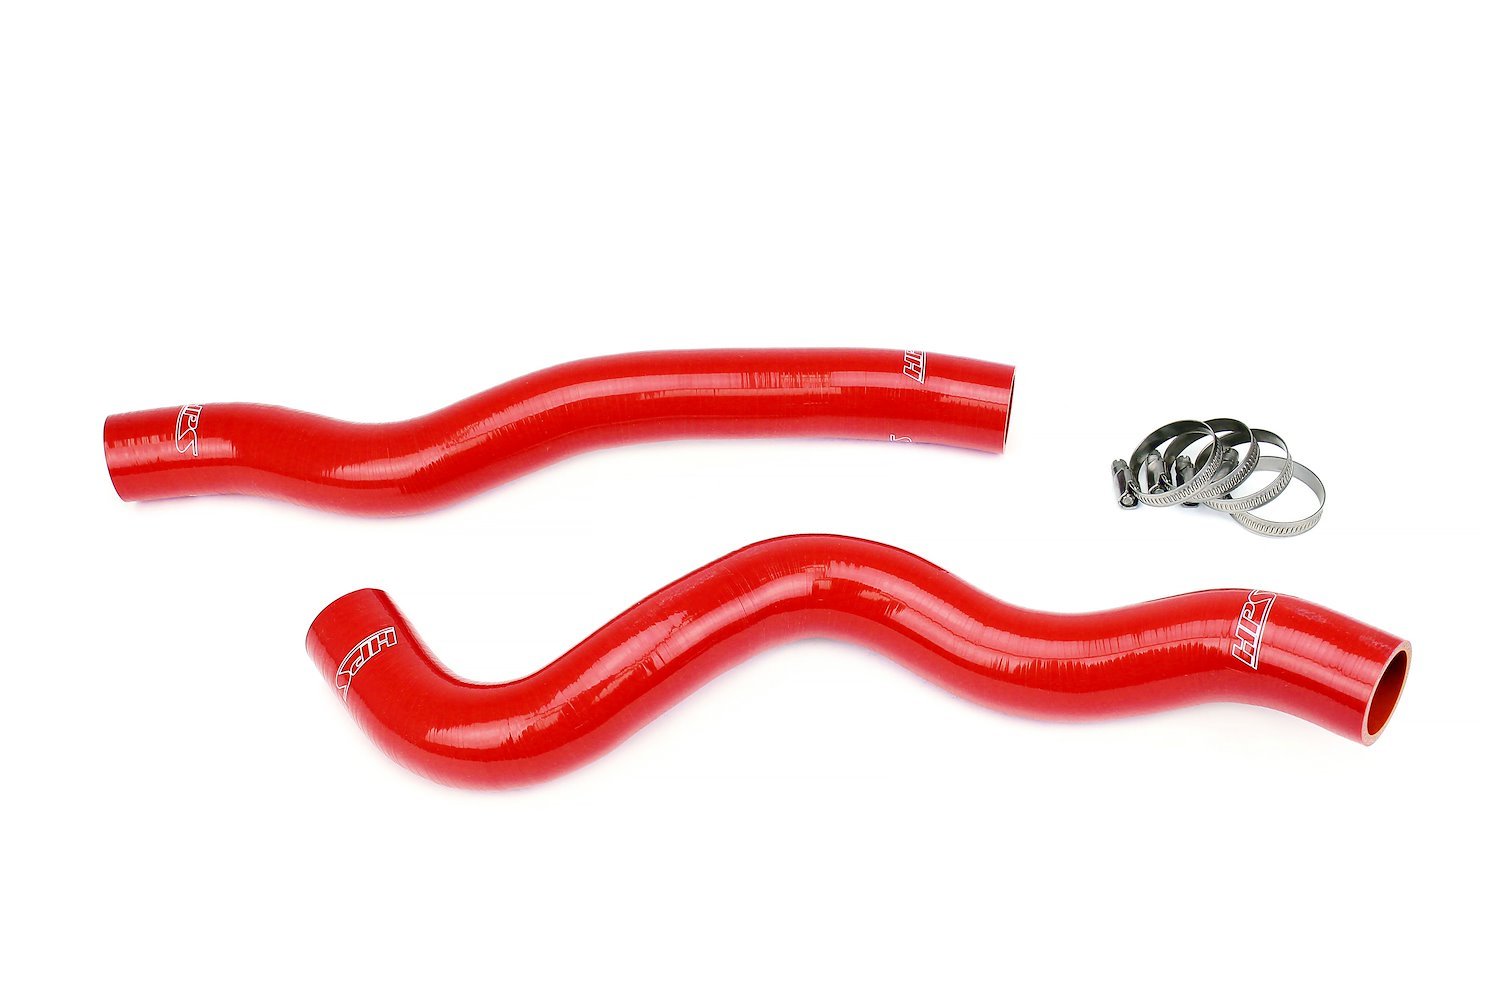 57-1964-RED Radiator Hose Kit, 3-Ply Reinforced Silicone, Replaces Rubber Radiator Coolant Hoses